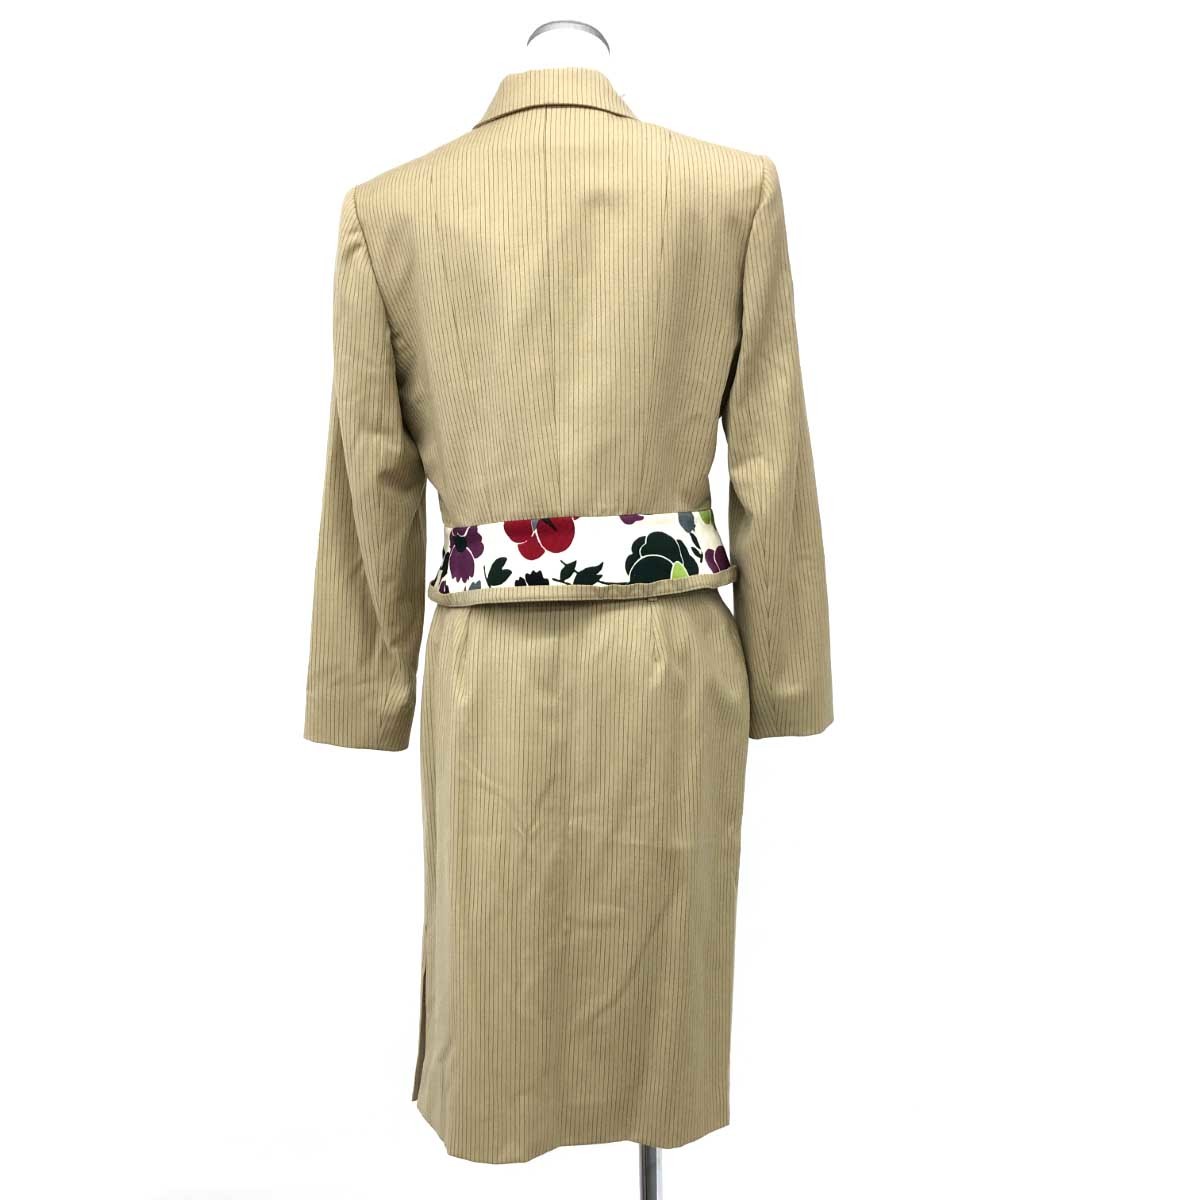 *Christian Dior Christian Dior skirt suit jacket 40 skirt 38* beige wool lady's Galliano period floral print 